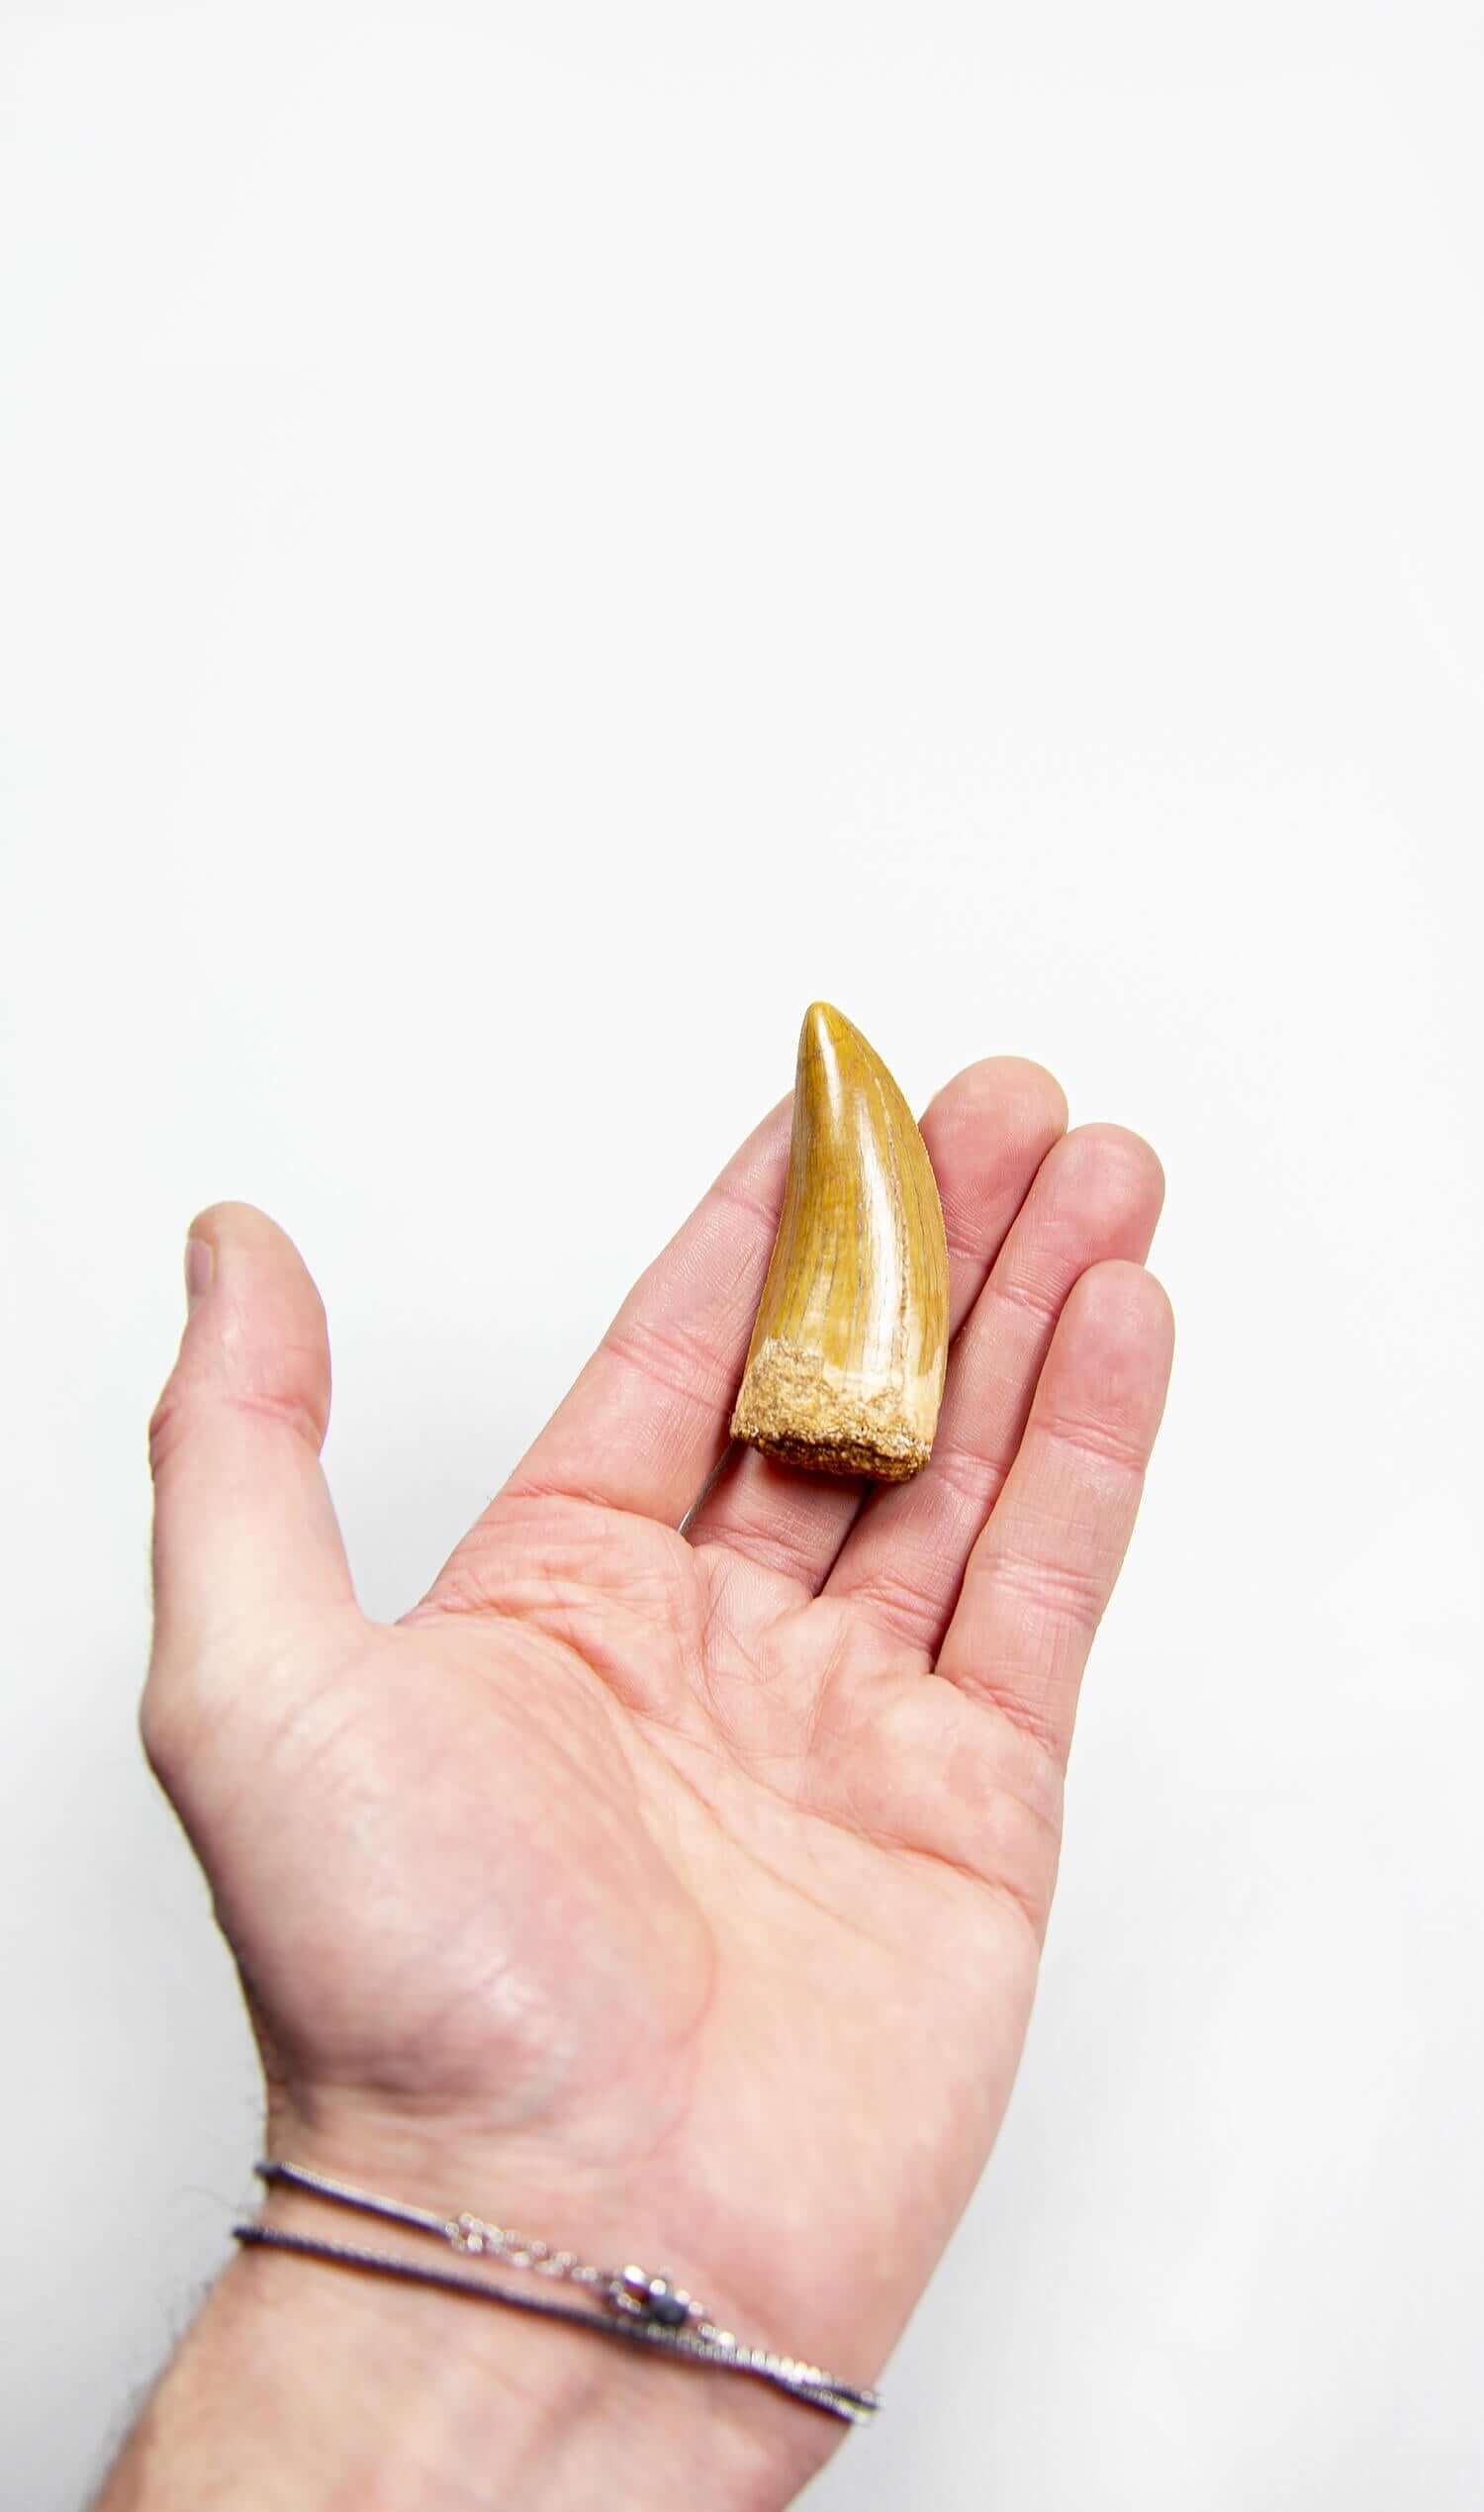 real fossil dinosaur carcharodontosaurus tooth for sale at the uk fossil store 46